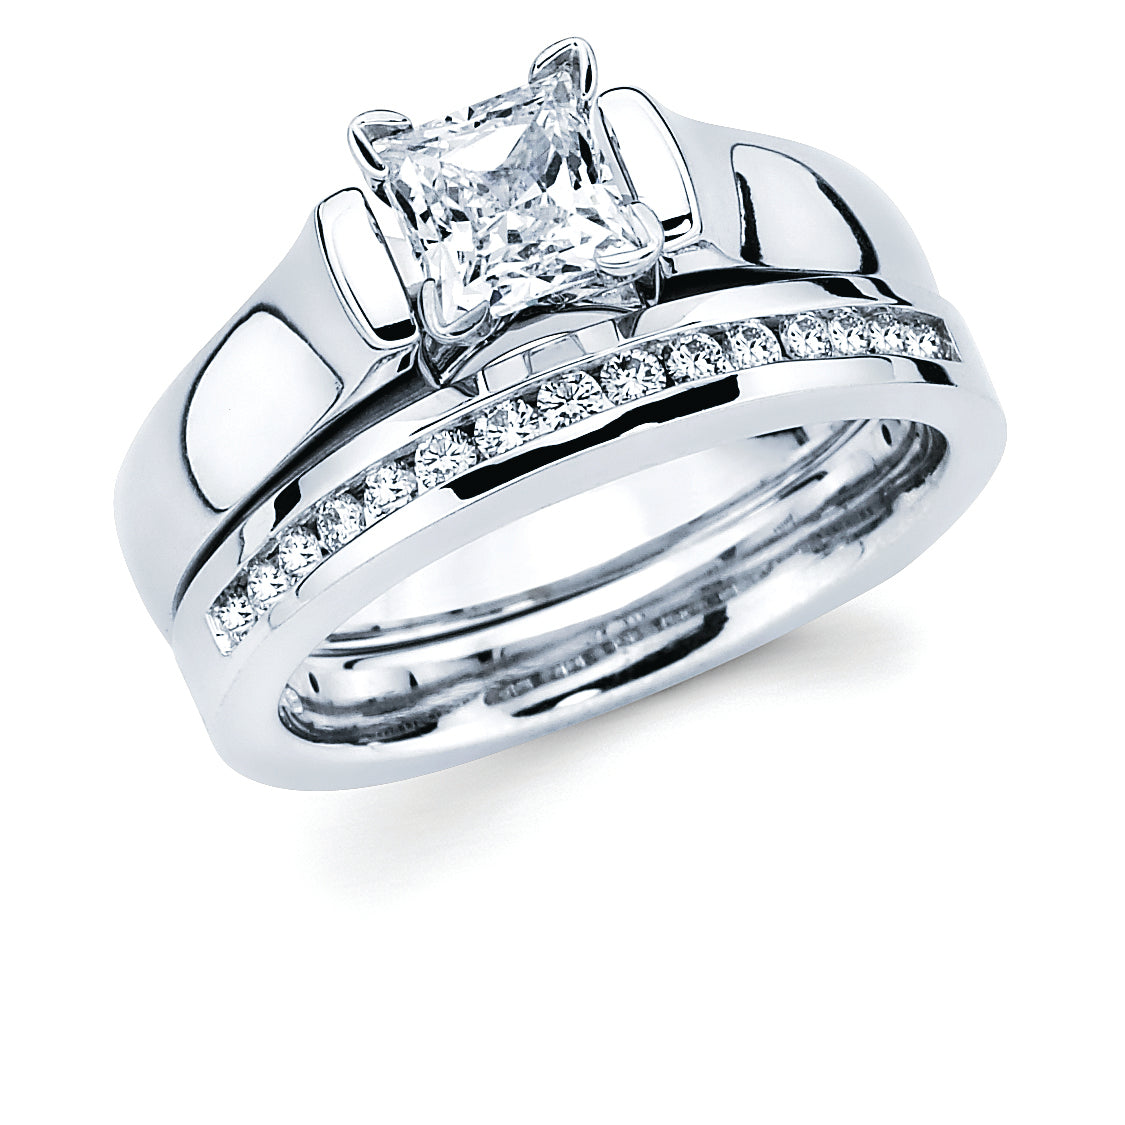 Classic Bridal: Diamond Ring shown with 3/4 Ct. Princess Cut Center Diamond in 14K Gold